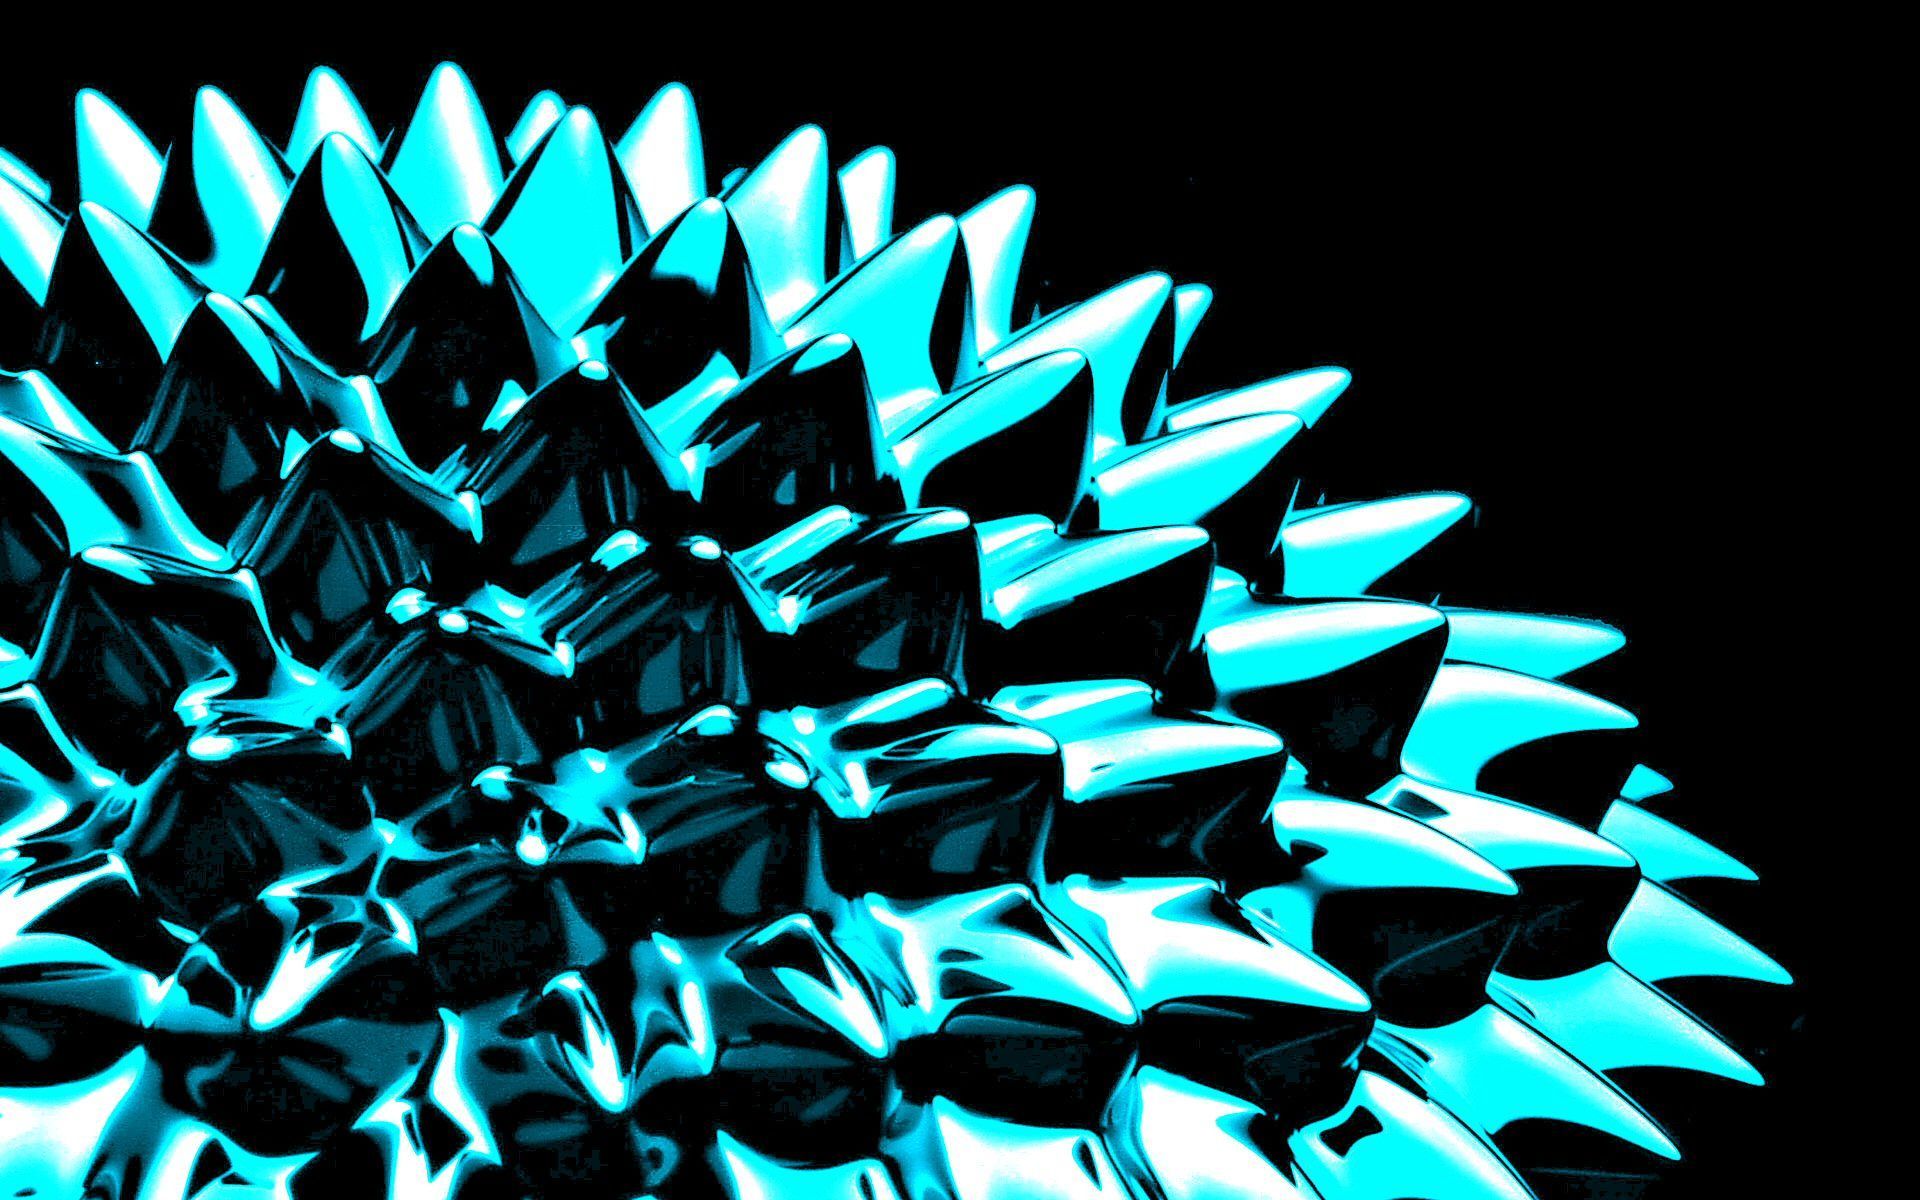 A blue and black object with sharp points - Cyan